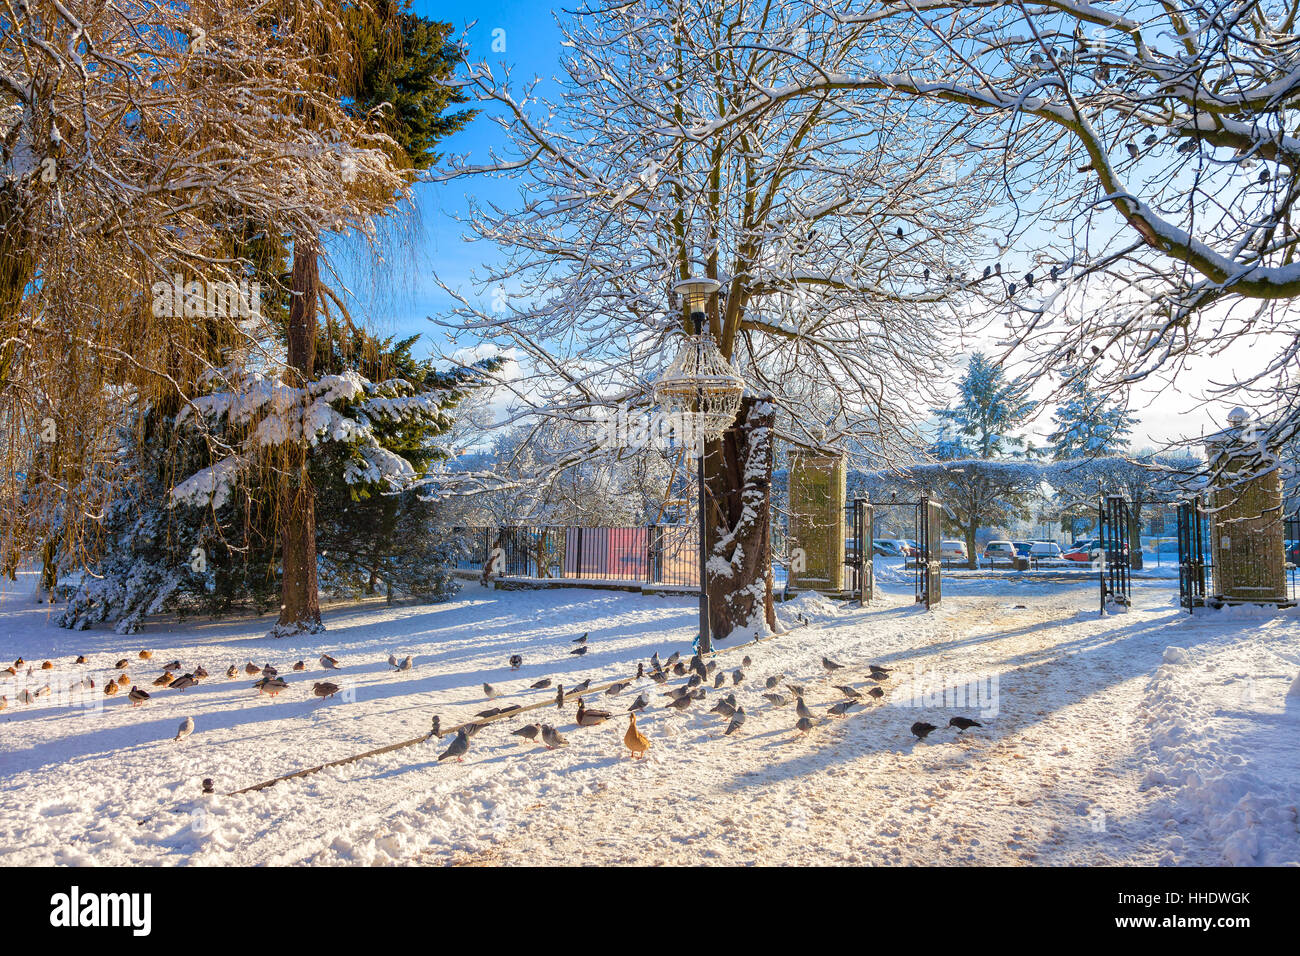 Entrance gates in winter to the city park in Oliwa, Poland. Stock Photo